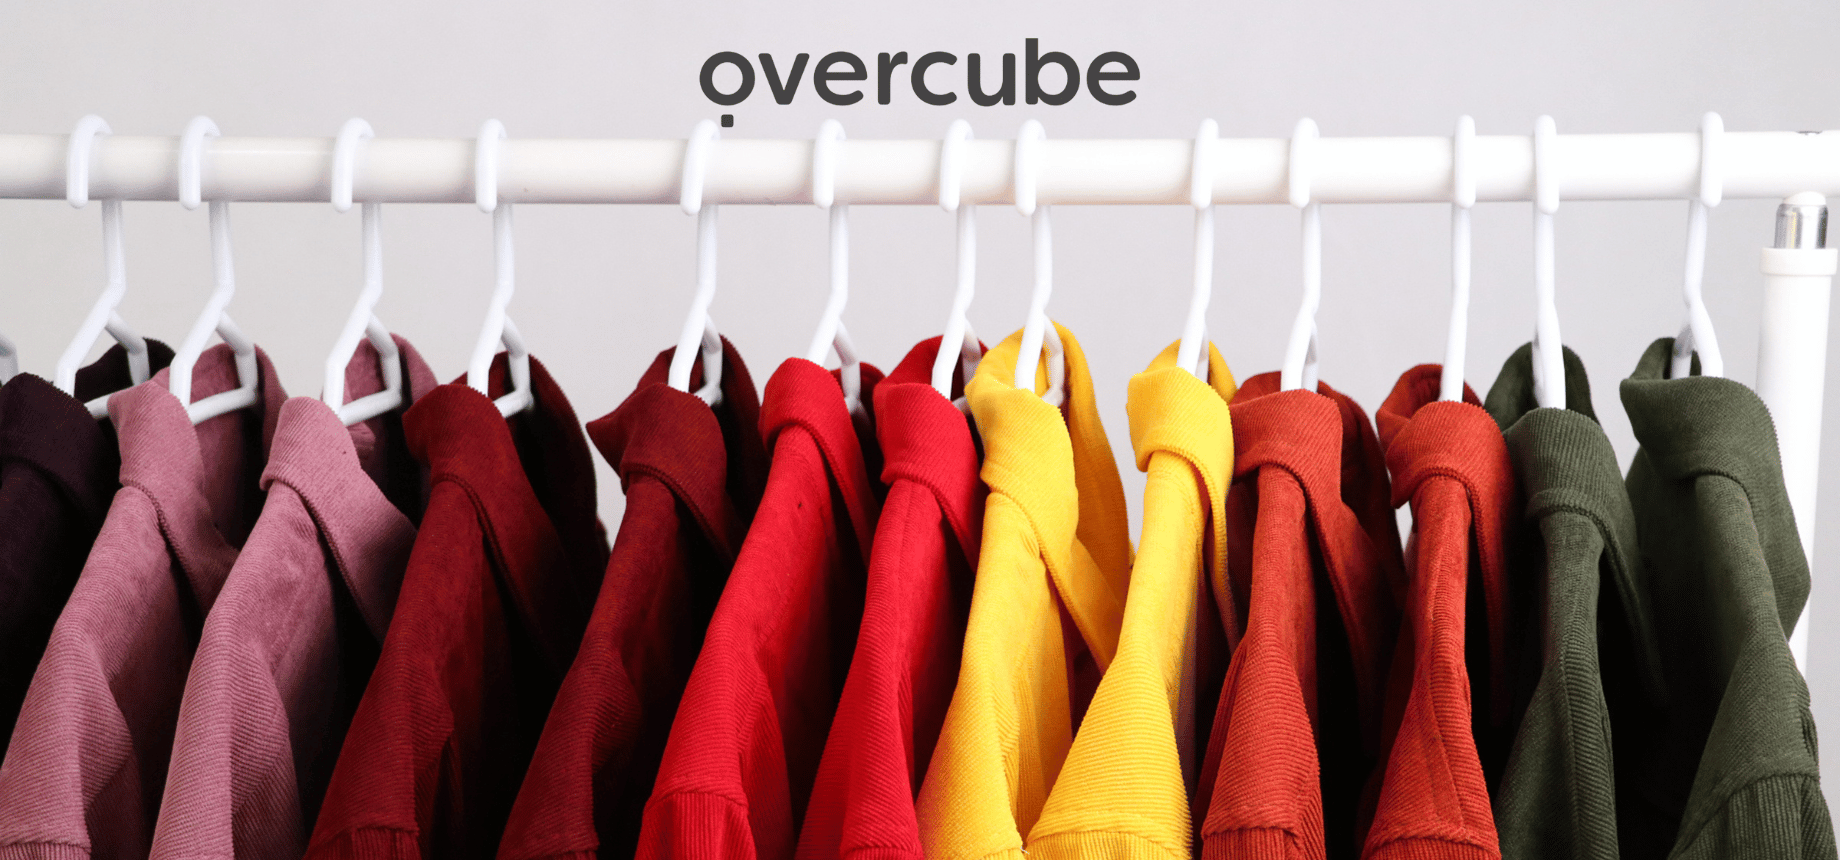 Clothes with Overcube logo above